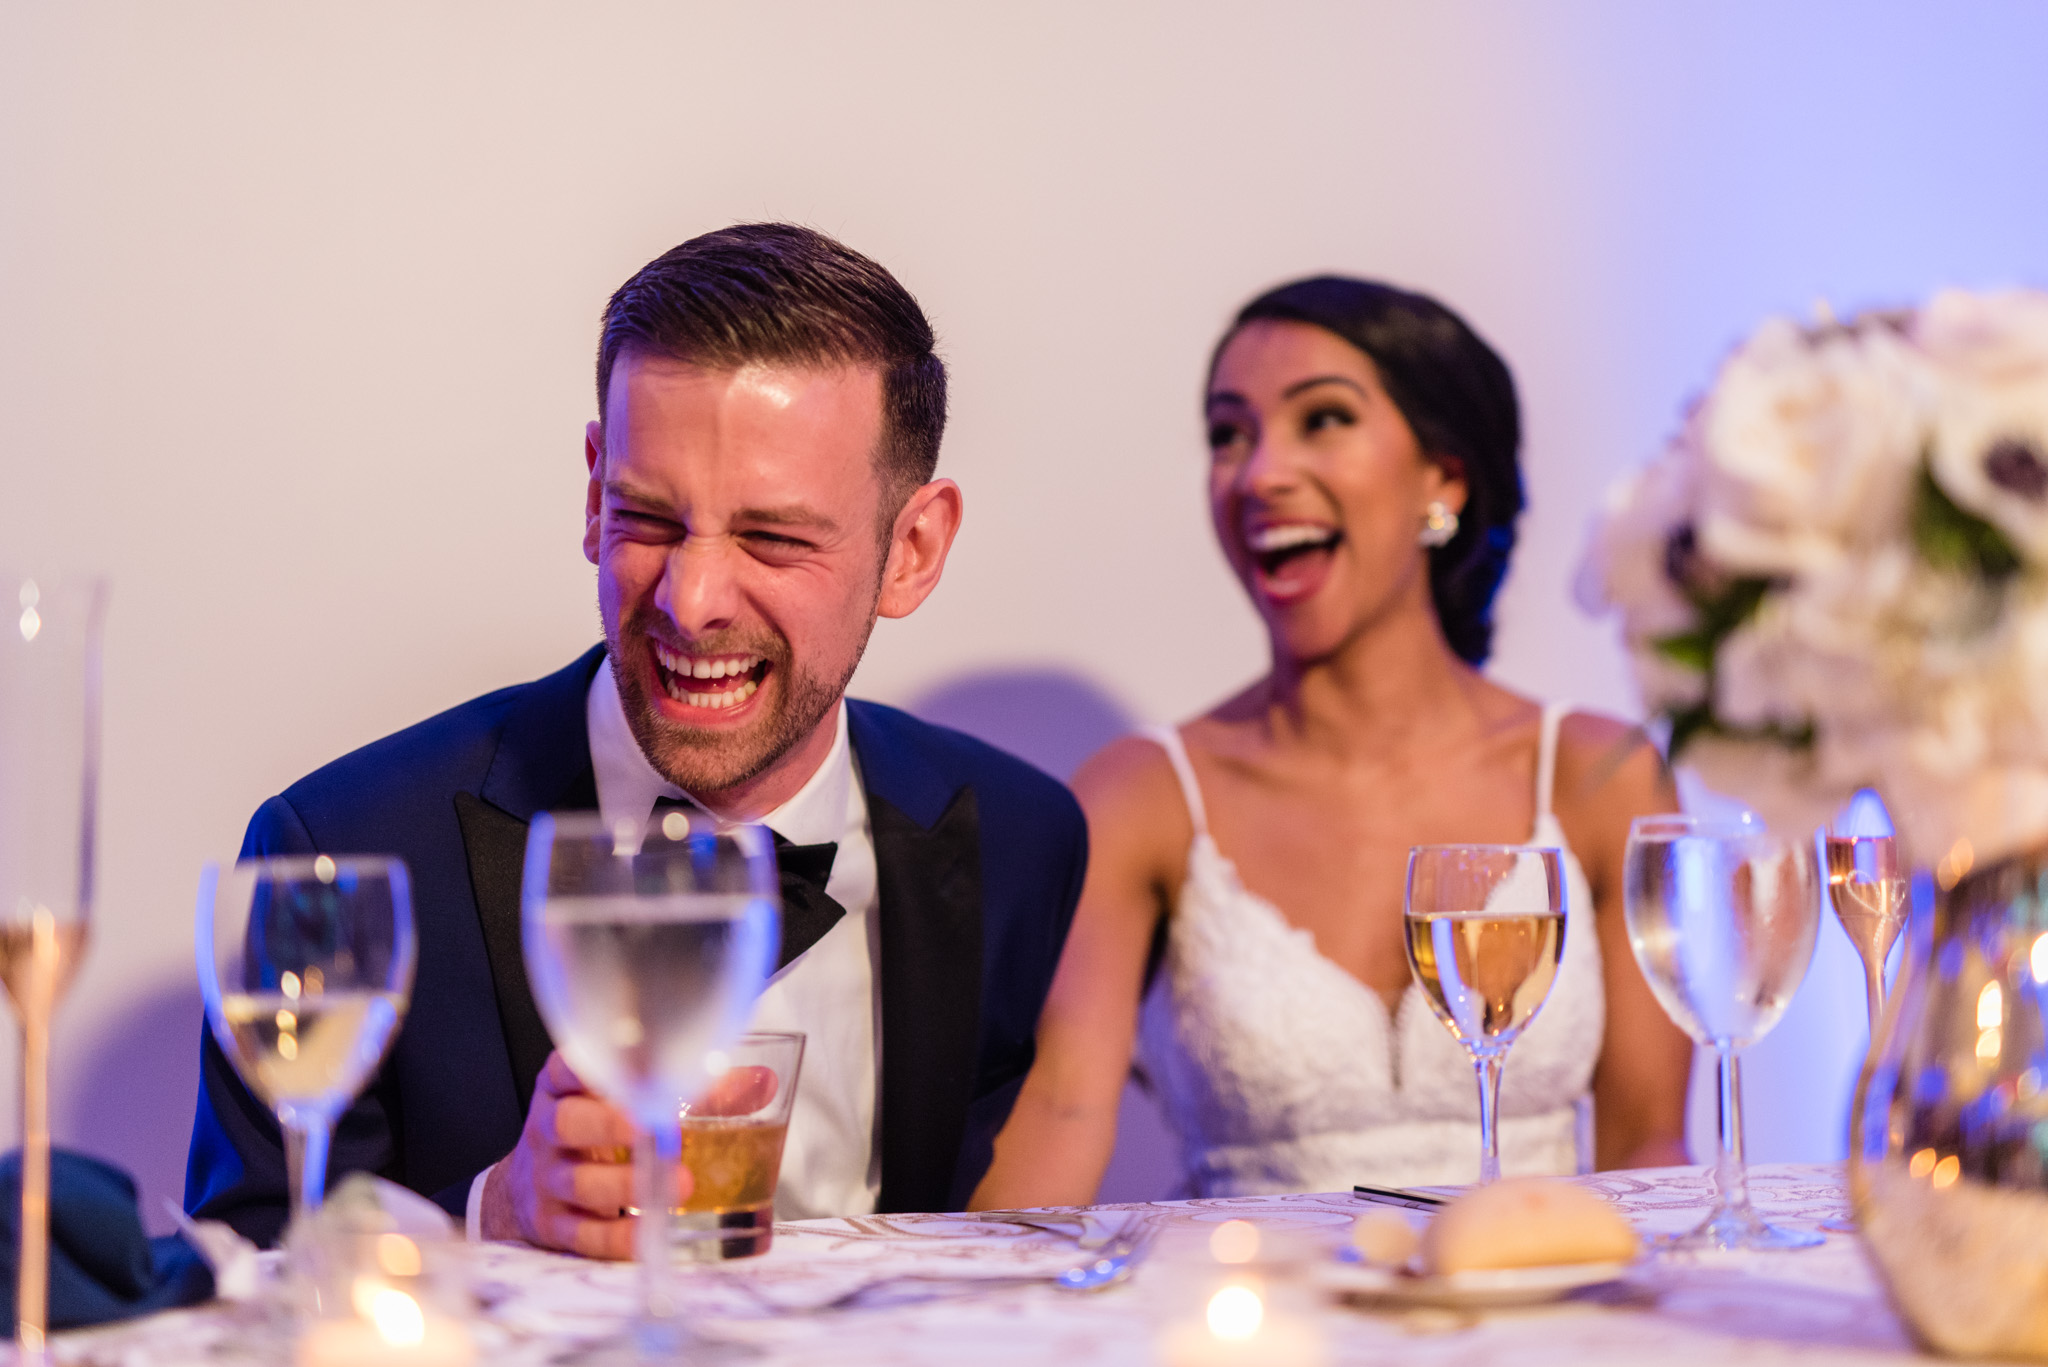 The bride and groom react with laughter to the wedding speeches